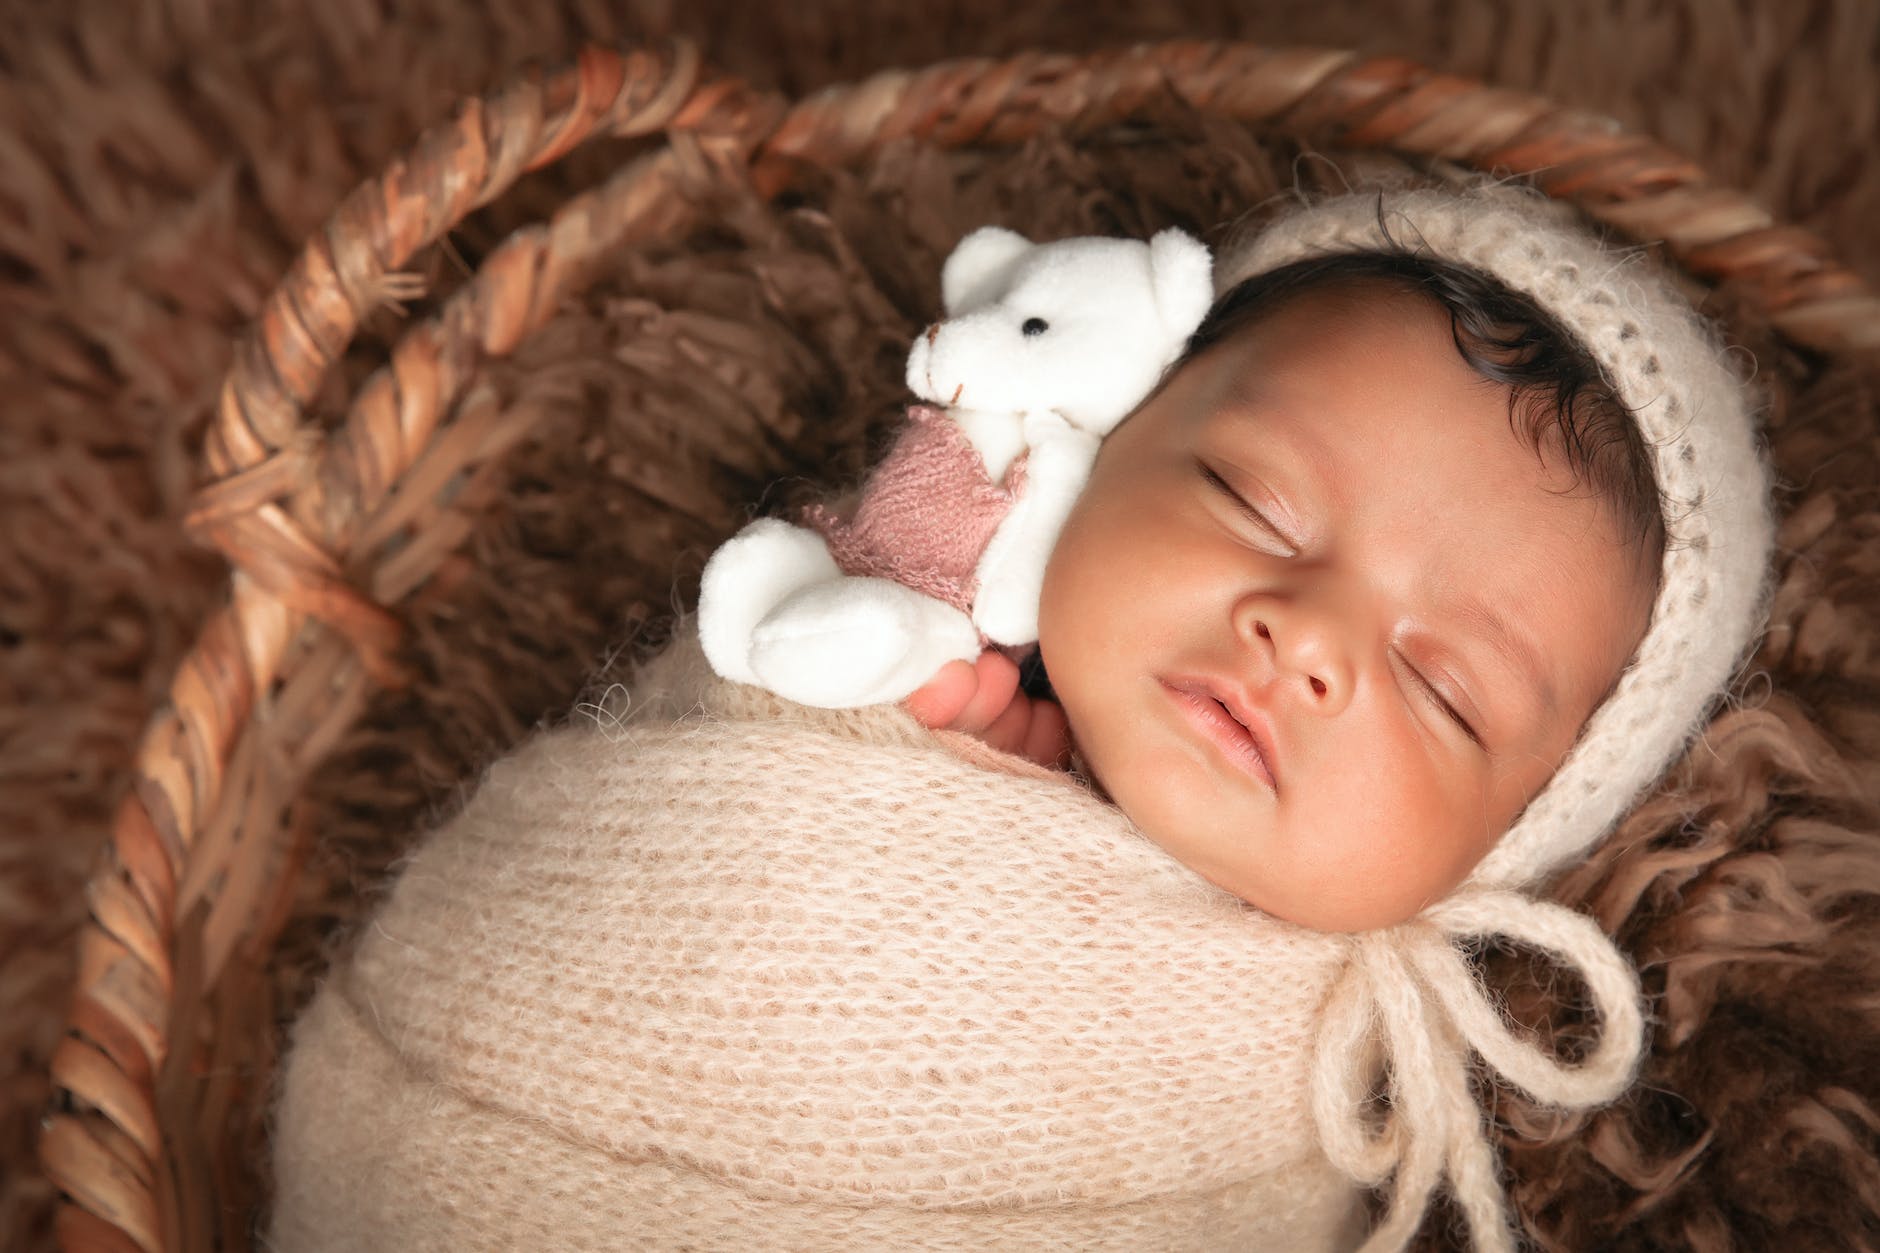 a newborn baby wrapped in a blanket lying in a basket